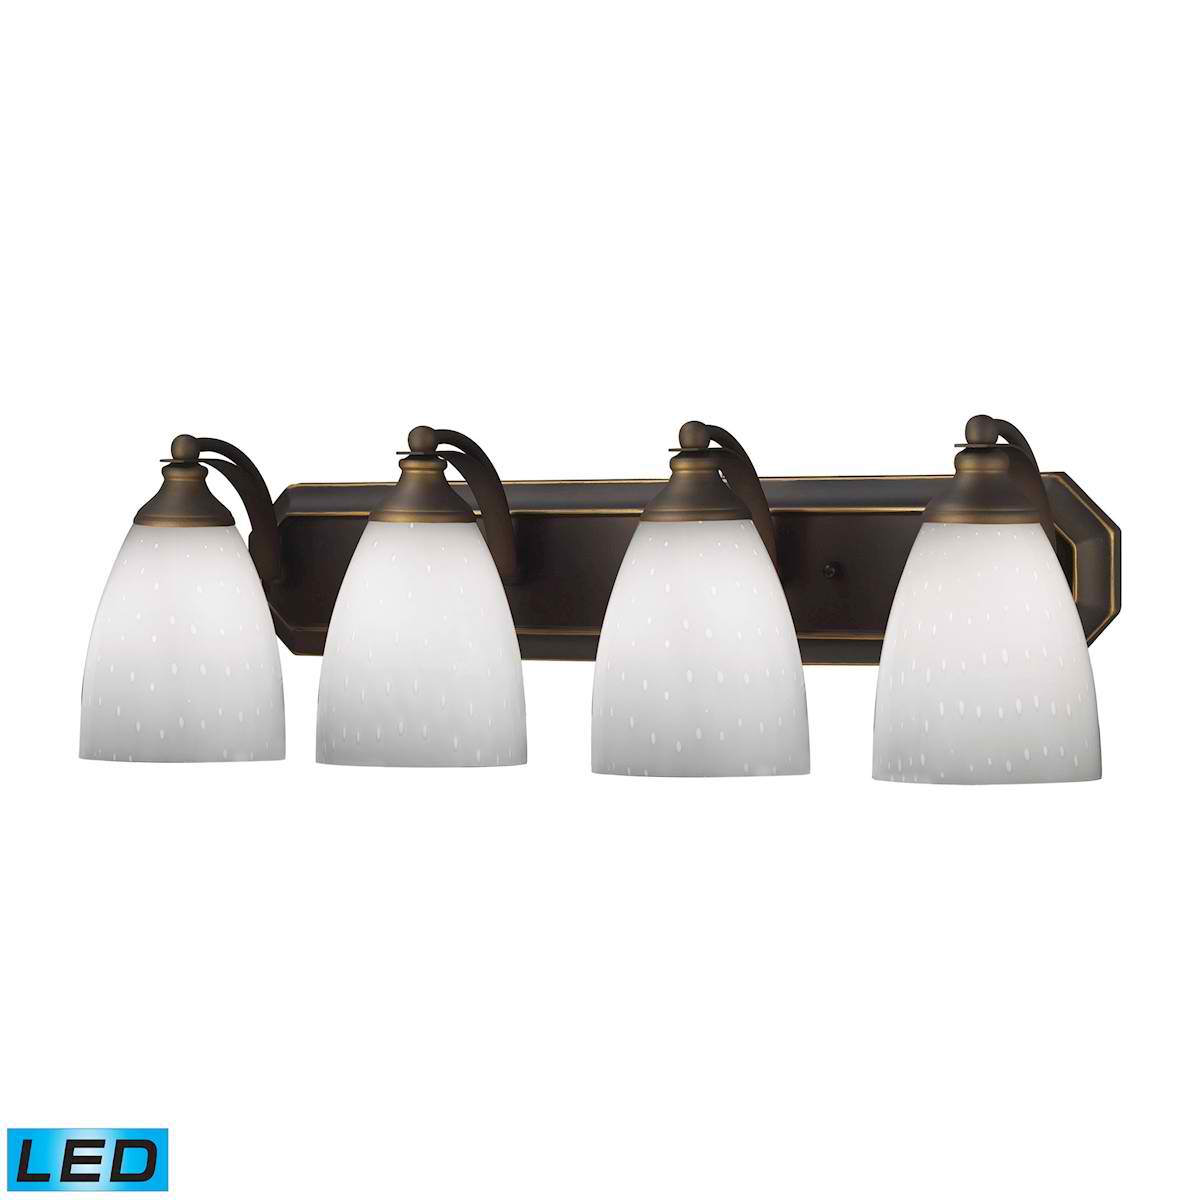 4 Light Vanity in Aged Bronze and Simply White Glass - LED, 800 Lumens (3200 Lumens Total) with Full Scale